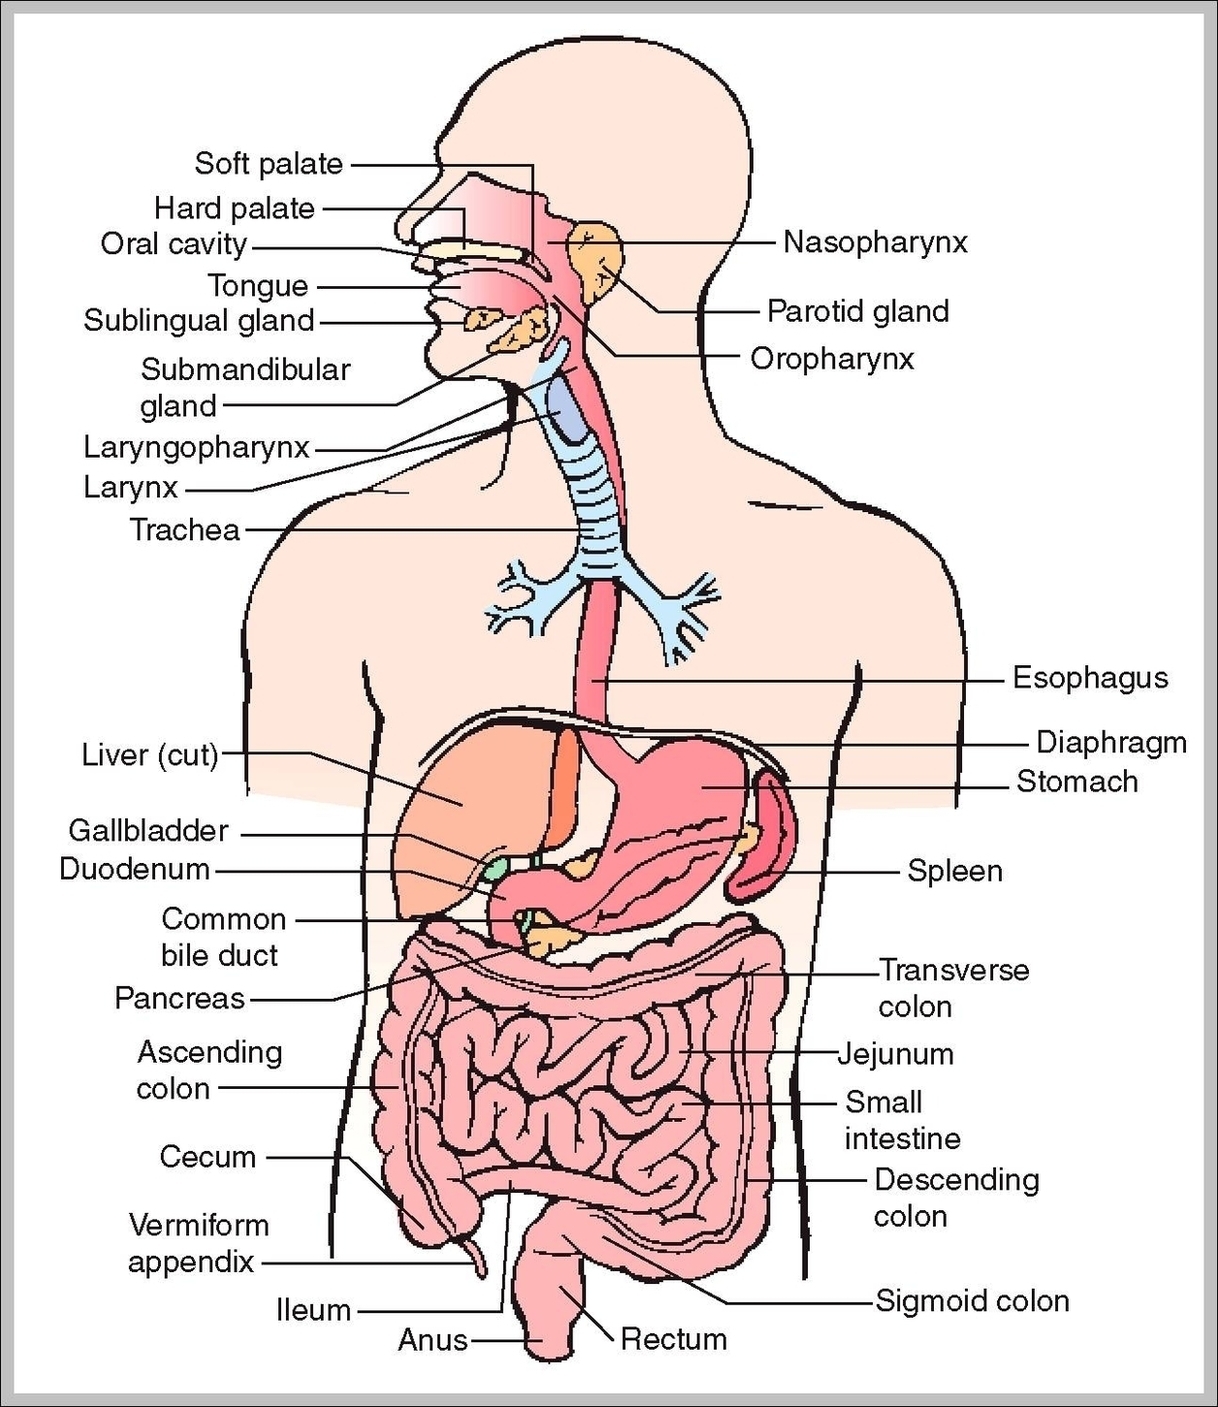 Picture Of Digestive Tract Image